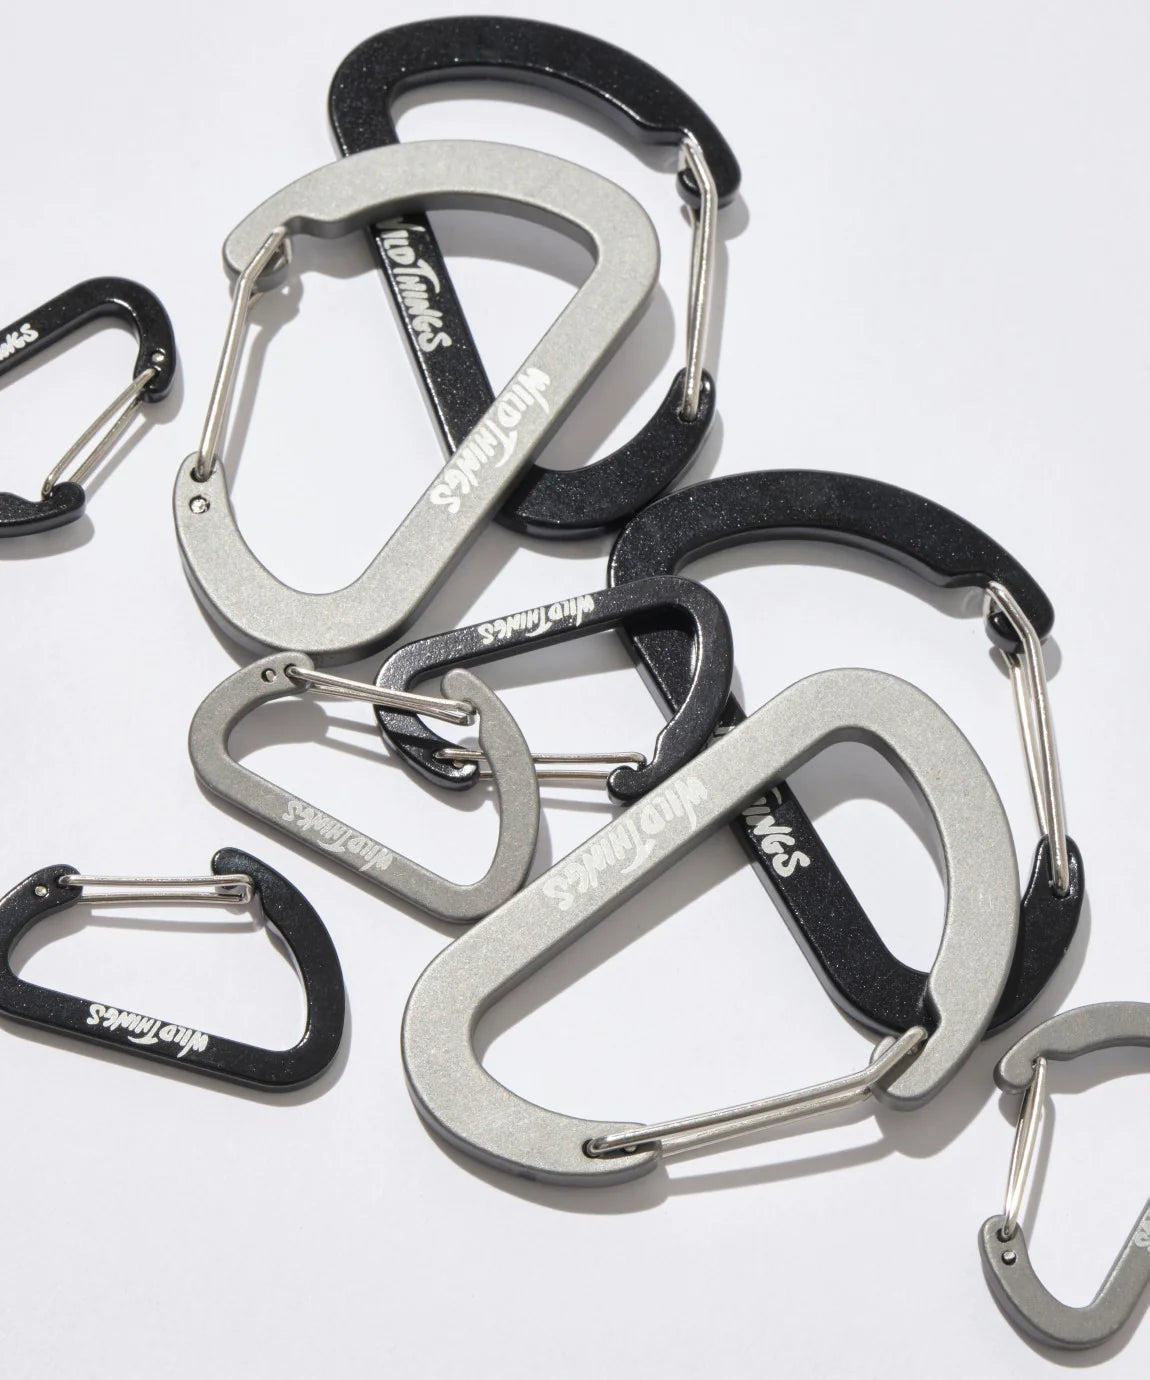 【WILD THINGS】THE PX CARABINER M｜カラビナ M 30%OFF